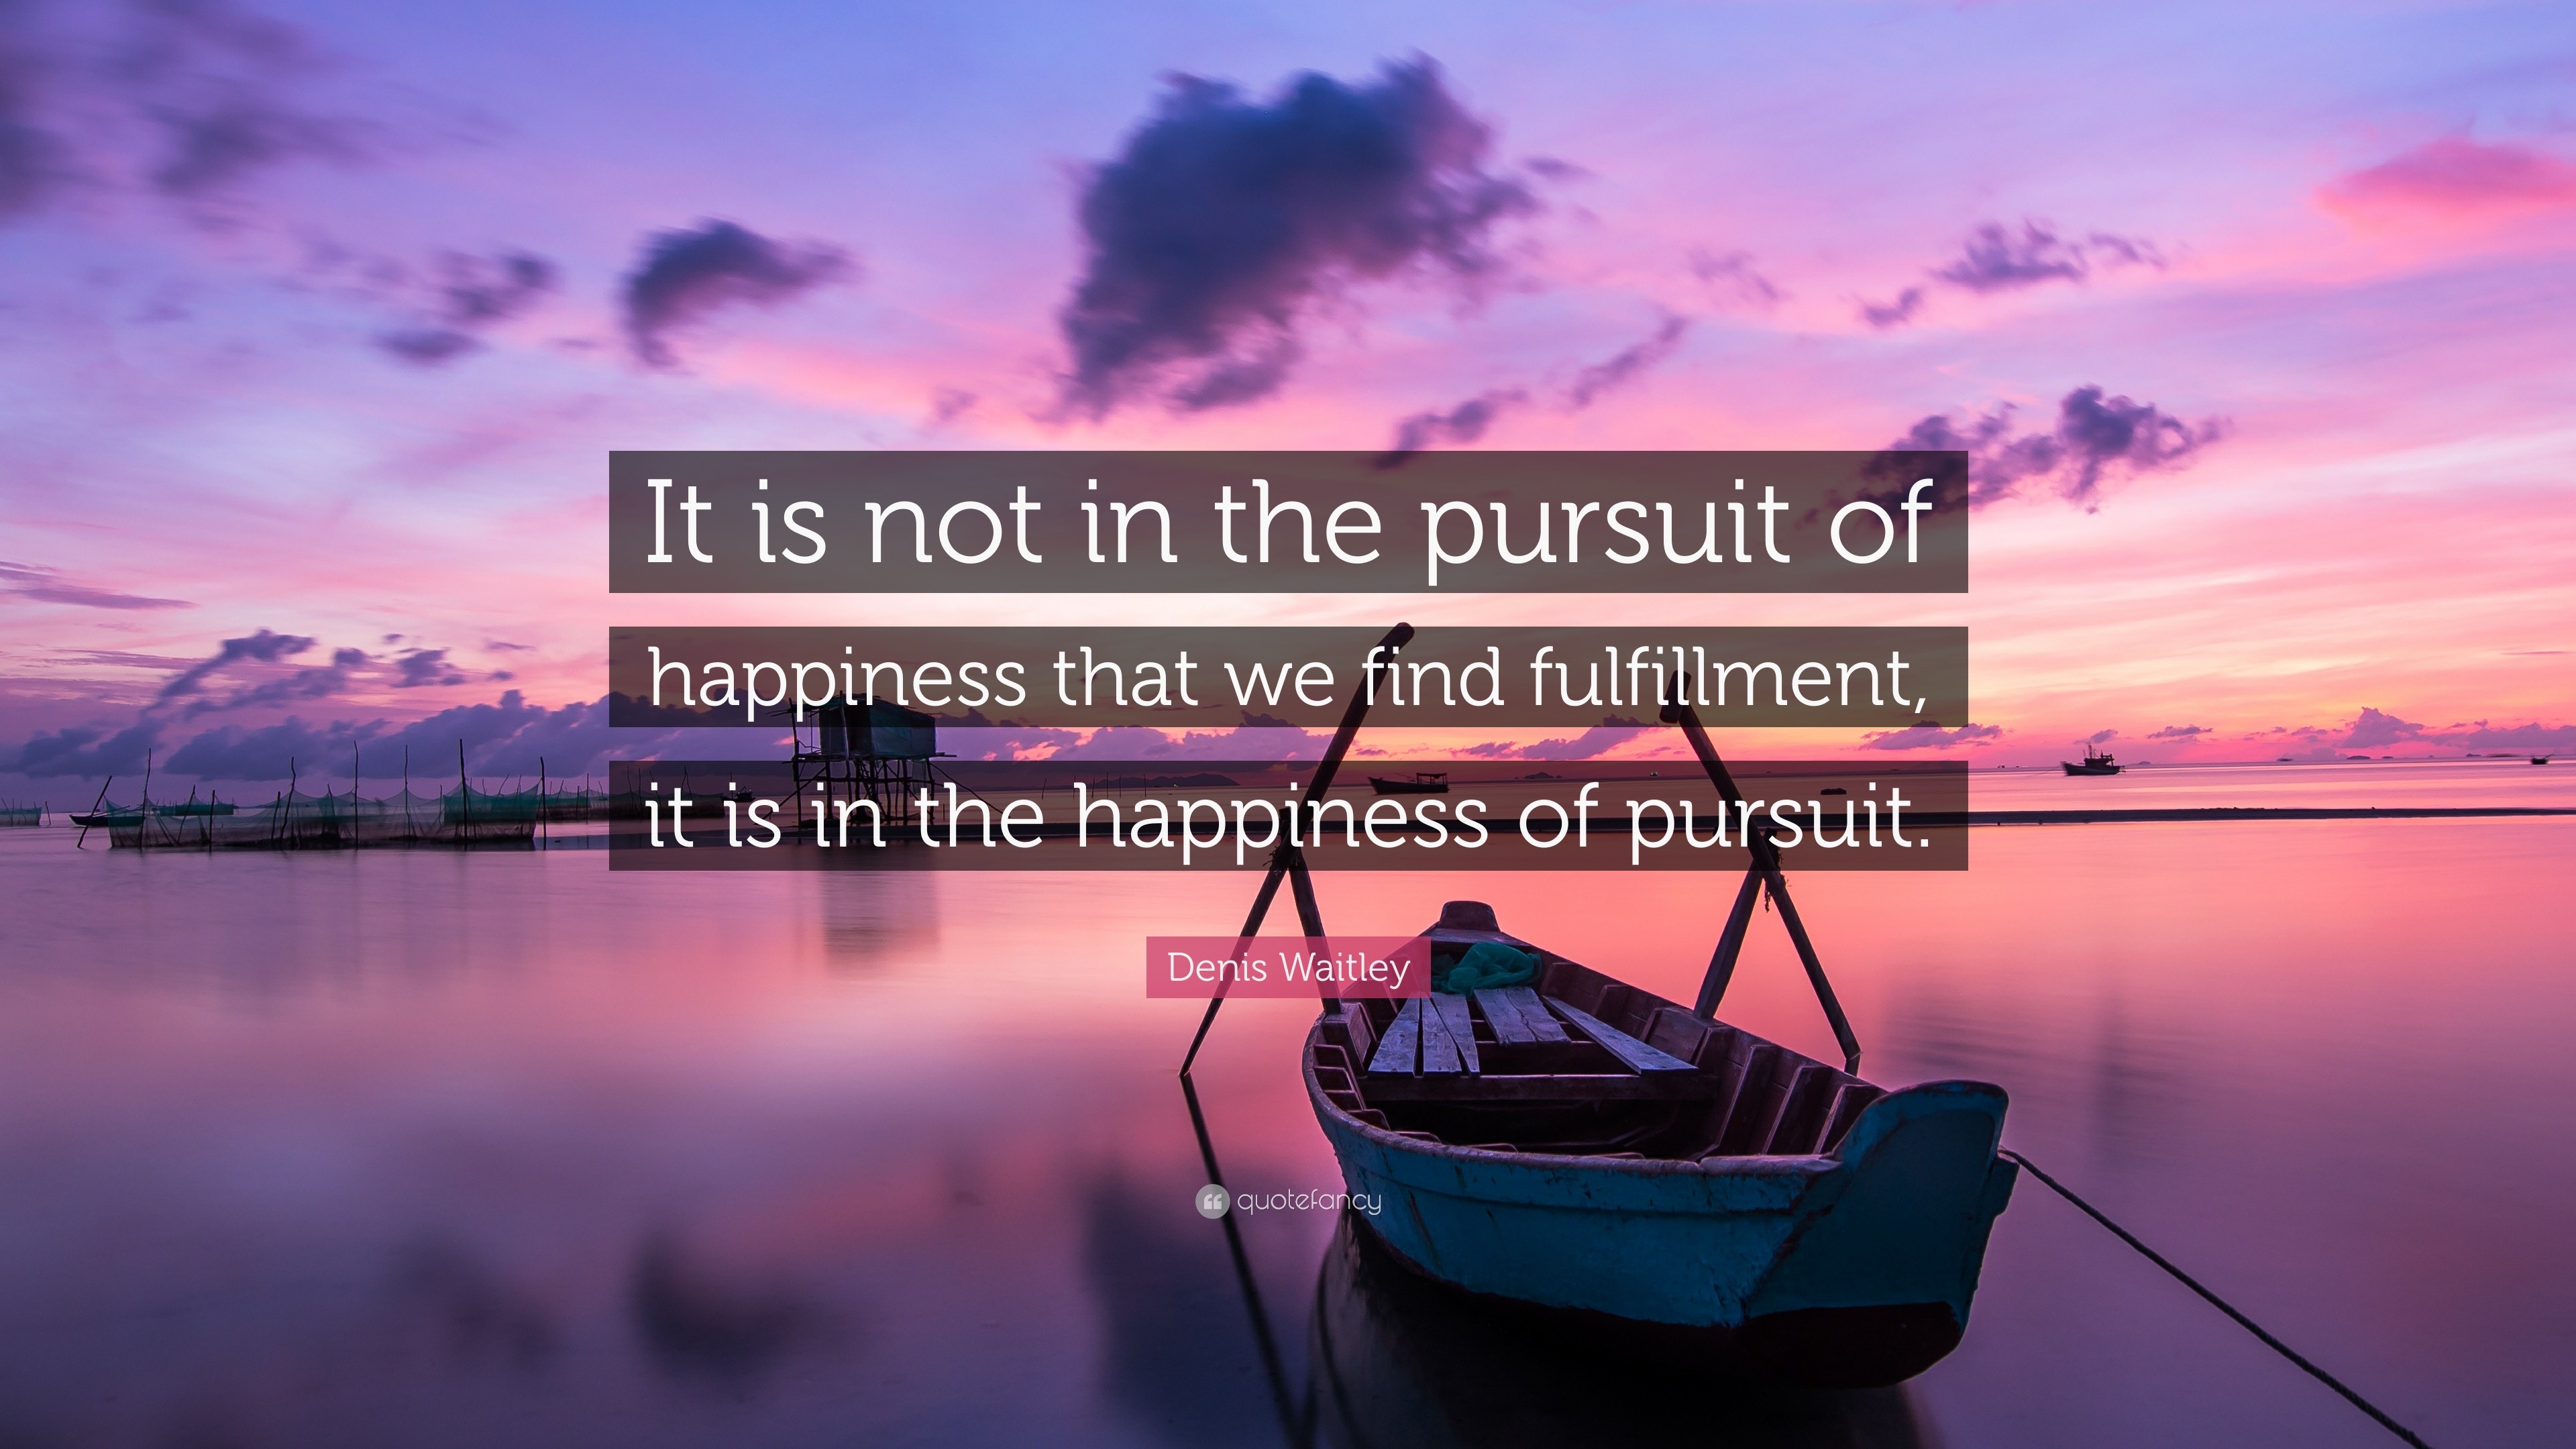 Denis Waitley Quote: “It is not in the pursuit of happiness that we